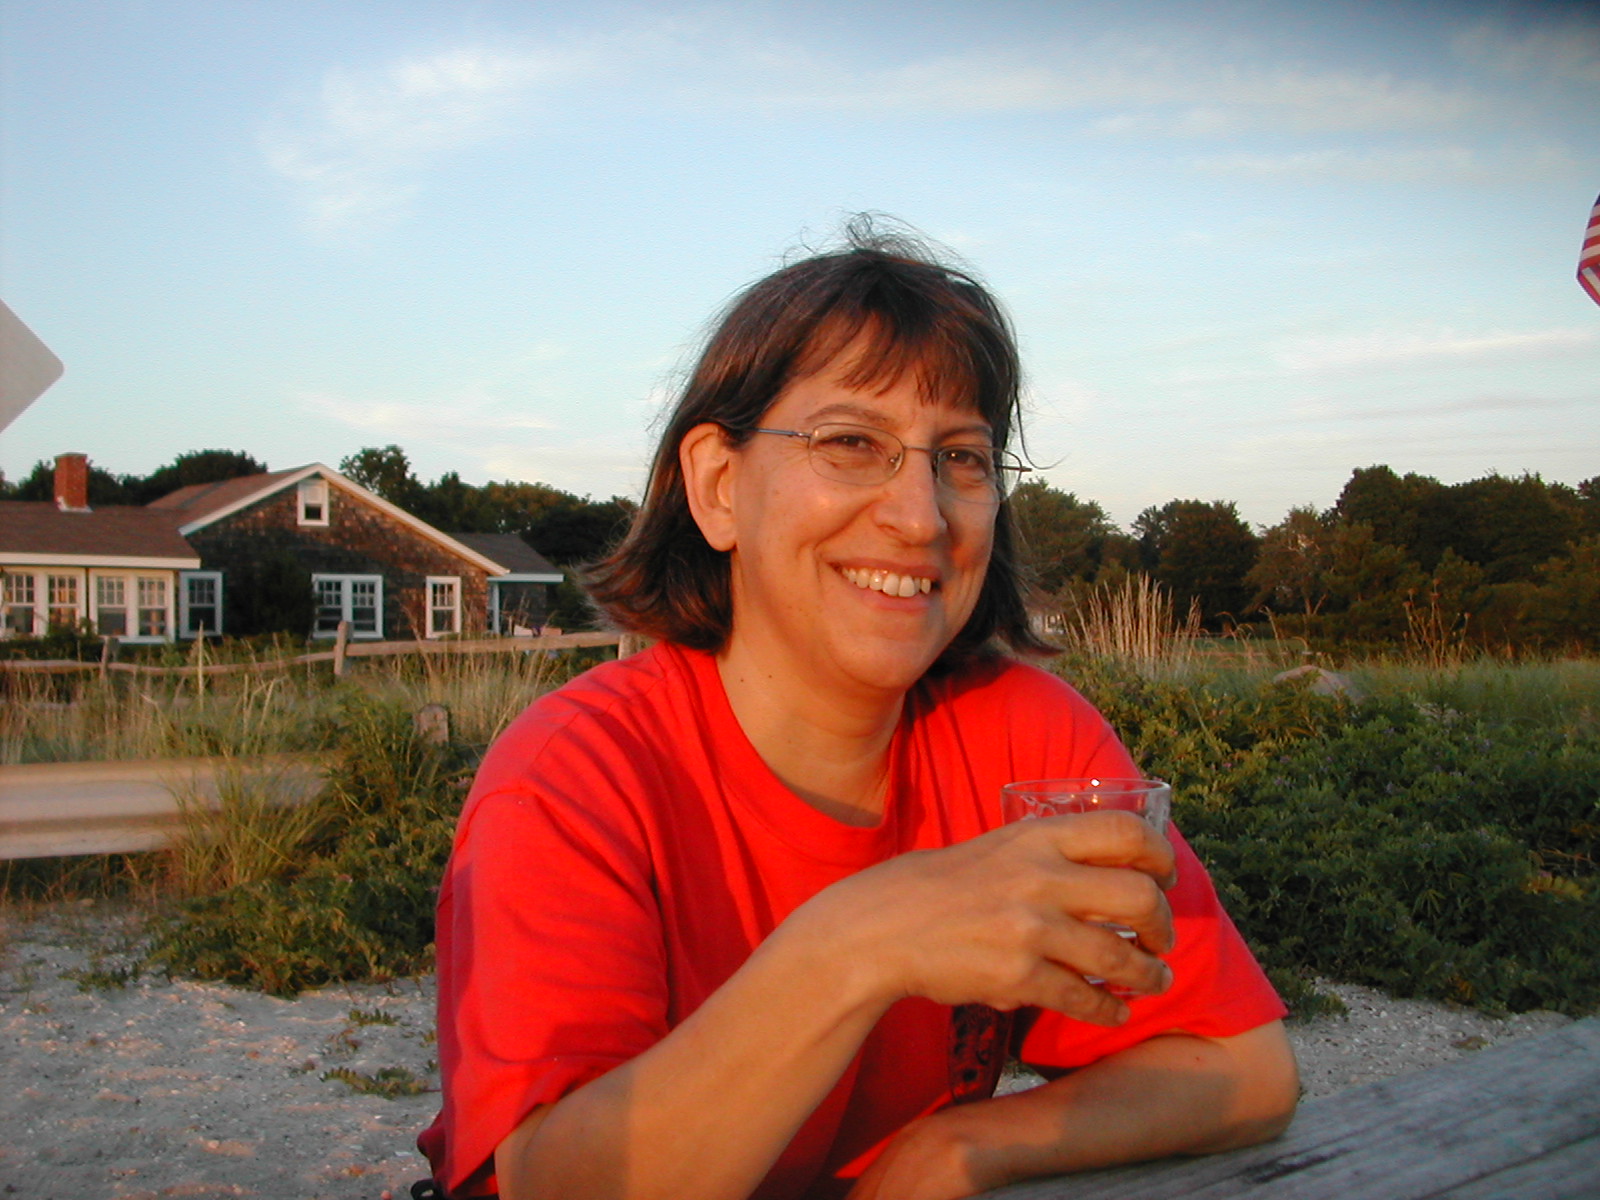 S.J. Rozan, a woman in a red t-shirt, is sitting at a table, forearms resting upon it, and holding a cup. She has short brown hair with bangs, round glasses, a medium skin tone, and is facing the camera. 